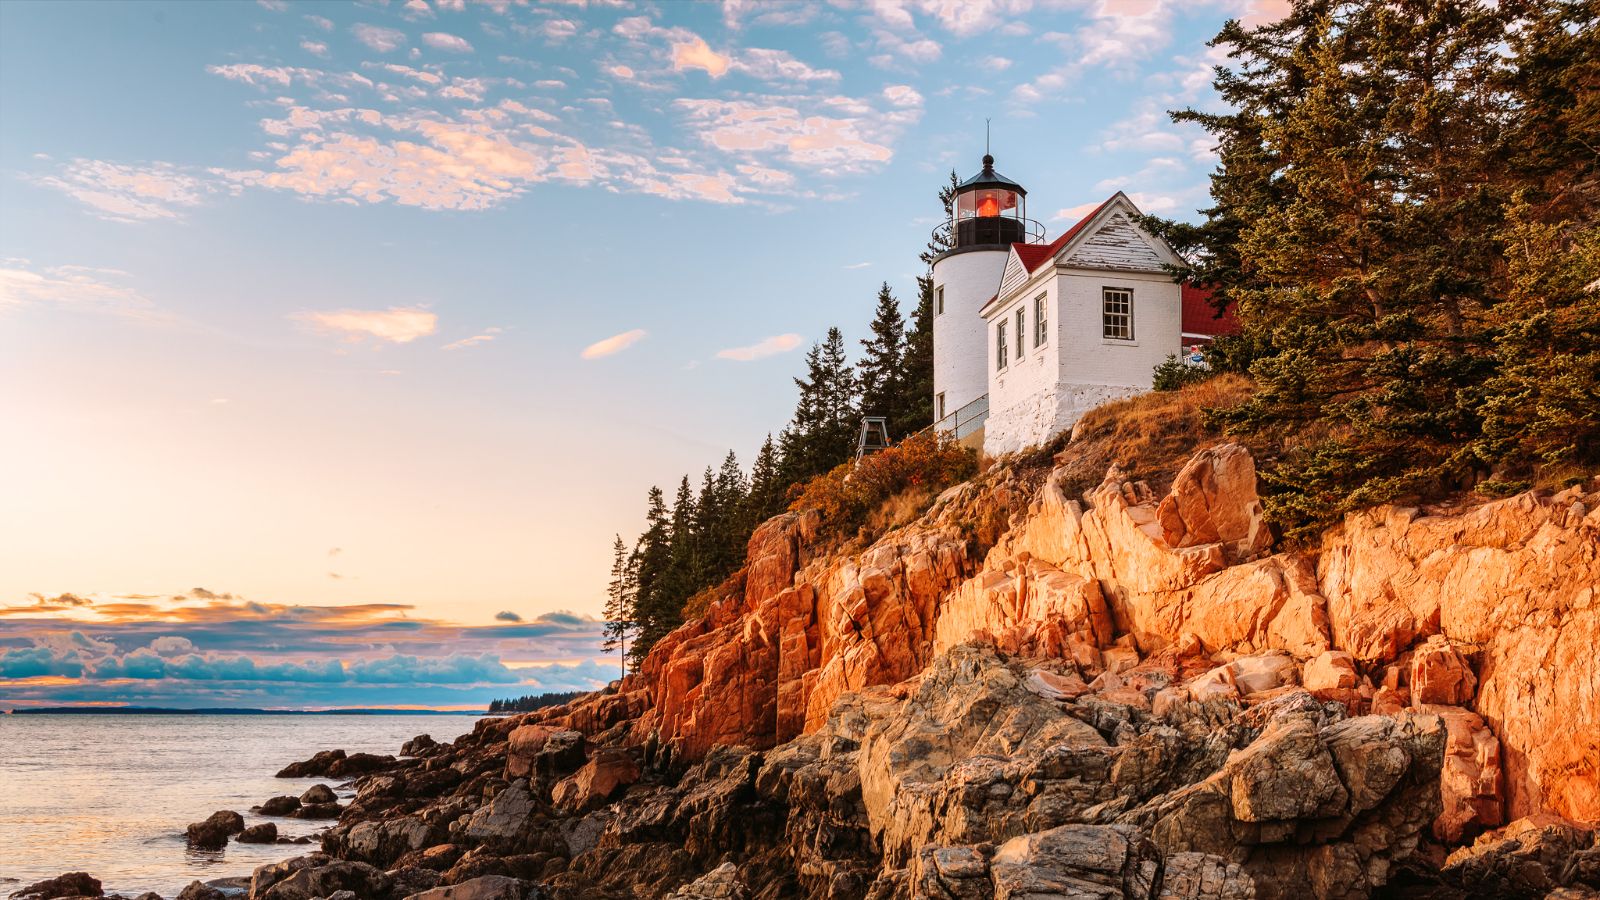 <p>Taking a road trip up or down the spectacular East Coast of the US is a must-do for many people. Planning where to go is all part of the fun if you’re among them. So, to provide some inspiration, here are 12 must-do stops for your East Coast itinerary, listed from north to south. </p>